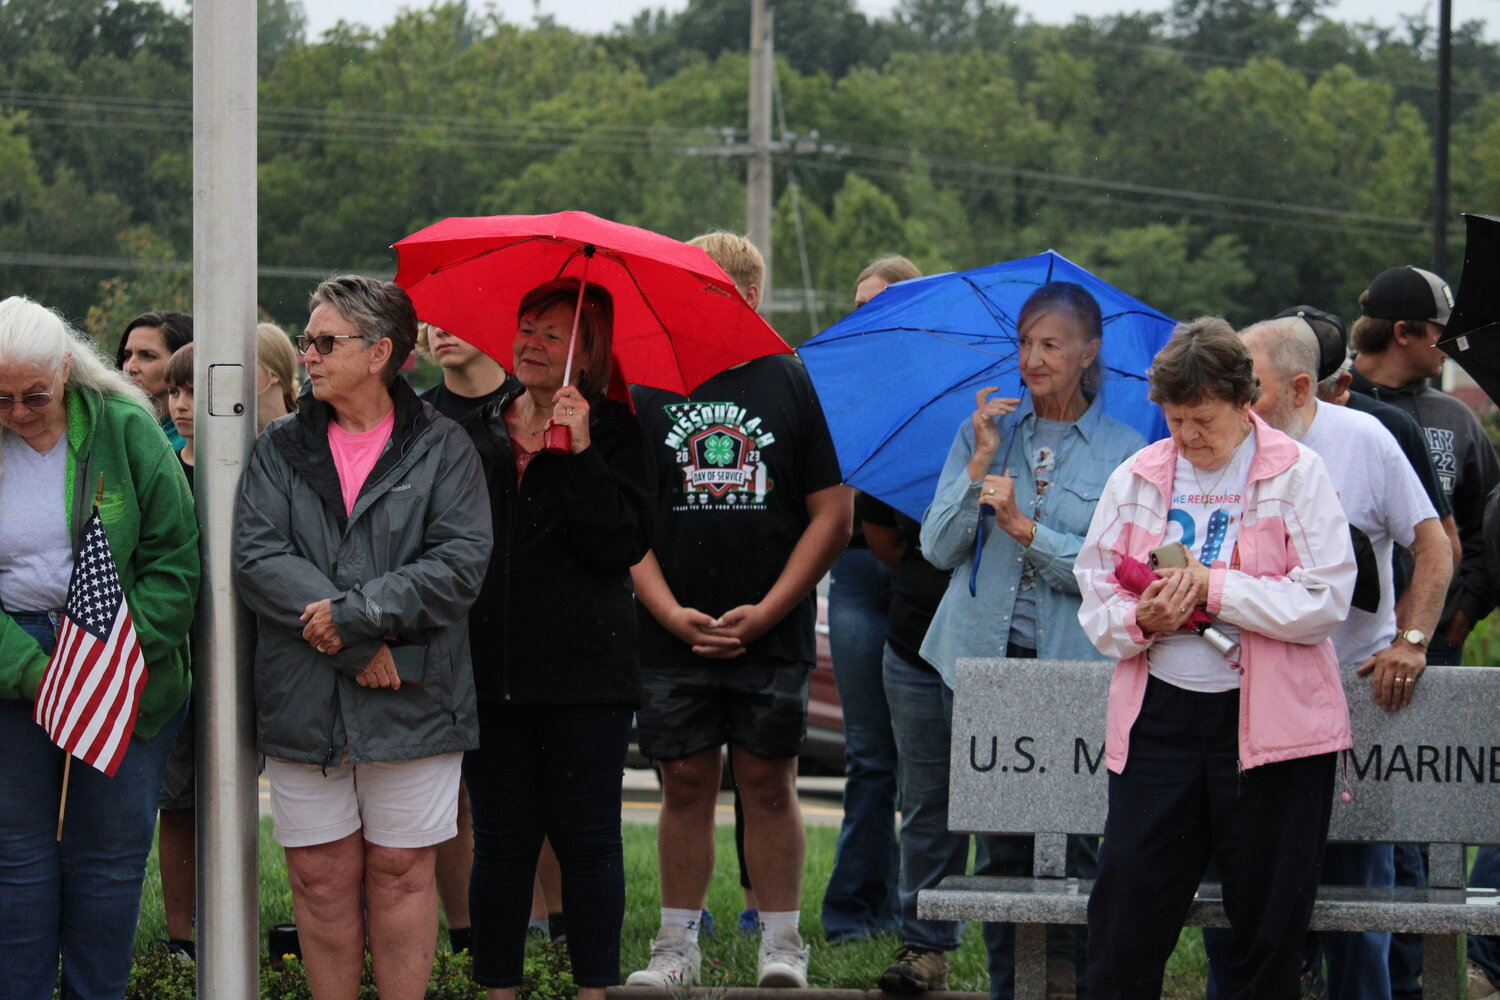 Members of the crowd listen to the speeches during the Sept. 11 ceremony.